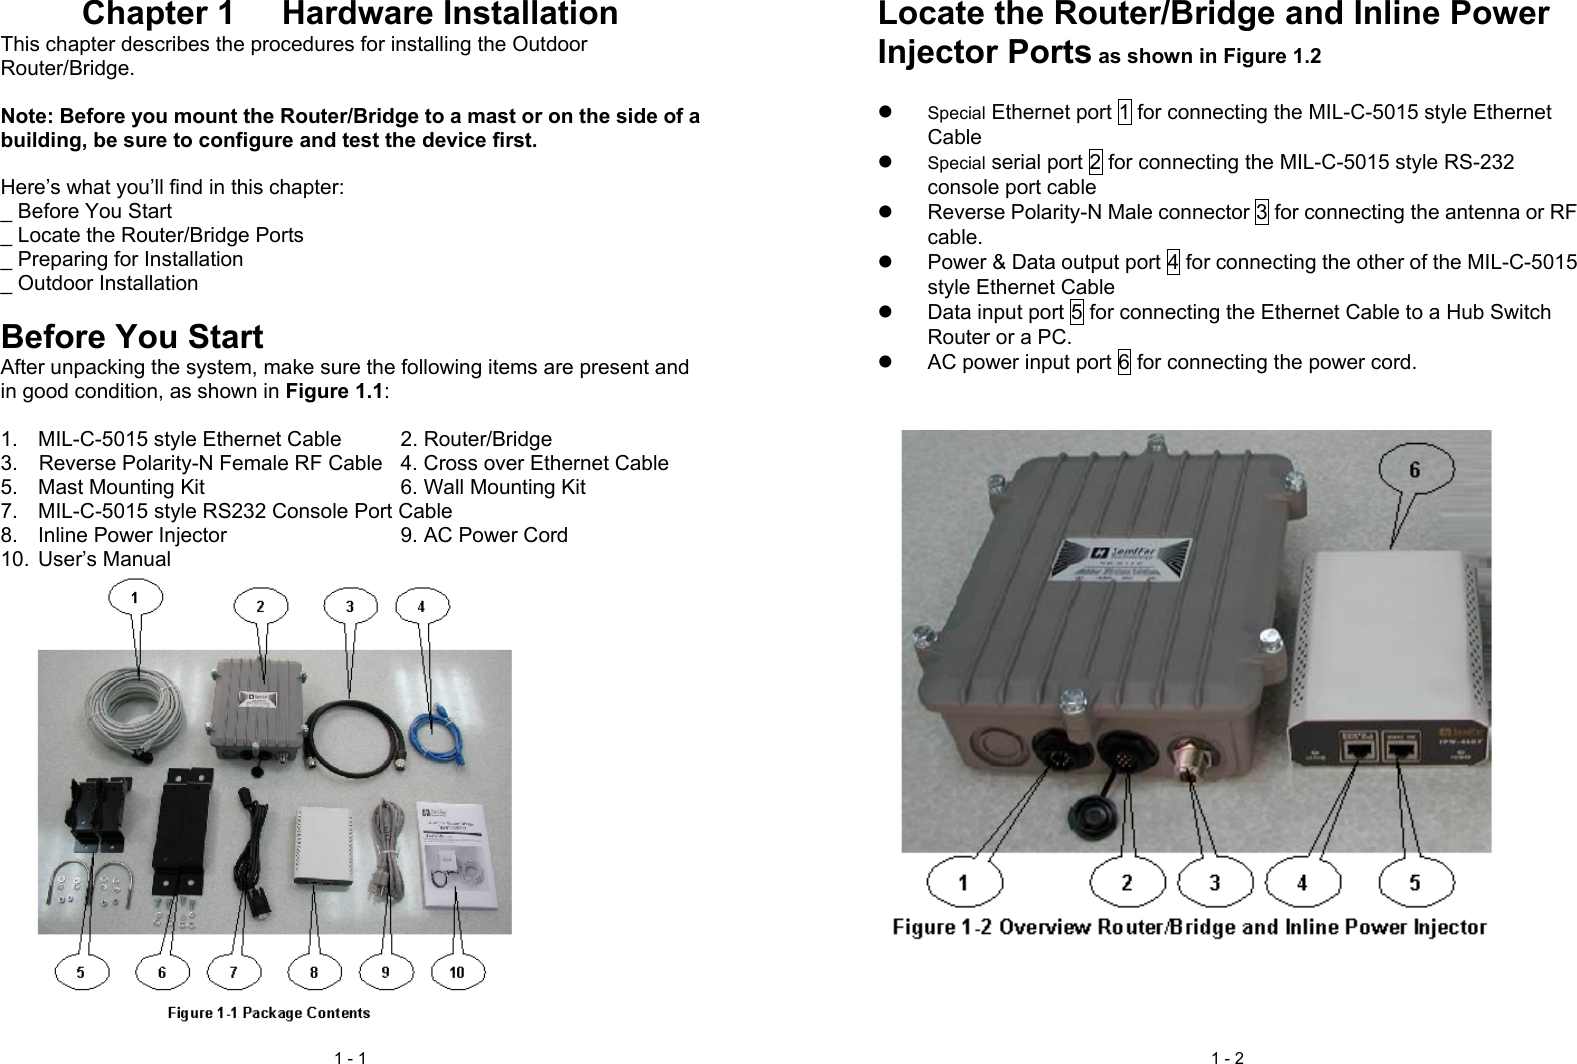 1 - 1Chapter 1  Hardware InstallationThis chapter describes the procedures for installing the OutdoorRouter/Bridge.Note: Before you mount the Router/Bridge to a mast or on the side of abuilding, be sure to configure and test the device first.Here’s what you’ll find in this chapter:_ Before You Start_ Locate the Router/Bridge Ports_ Preparing for Installation_ Outdoor InstallationBefore You StartAfter unpacking the system, make sure the following items are present andin good condition, as shown in Figure 1.1:1.  MIL-C-5015 style Ethernet Cable 2. Router/Bridge3.    Reverse Polarity-N Female RF Cable 4. Cross over Ethernet Cable5.  Mast Mounting Kit  6. Wall Mounting Kit7.  MIL-C-5015 style RS232 Console Port Cable8.  Inline Power Injector  9. AC Power Cord10. User’s Manual1 - 2Locate the Router/Bridge and Inline PowerInjector Ports as shown in Figure 1.2z Special Ethernet port 1 for connecting the MIL-C-5015 style EthernetCablez Special serial port 2 for connecting the MIL-C-5015 style RS-232console port cablez  Reverse Polarity-N Male connector 3 for connecting the antenna or RFcable.z  Power &amp; Data output port 4 for connecting the other of the MIL-C-5015style Ethernet Cablez  Data input port 5 for connecting the Ethernet Cable to a Hub SwitchRouter or a PC.z  AC power input port 6 for connecting the power cord.